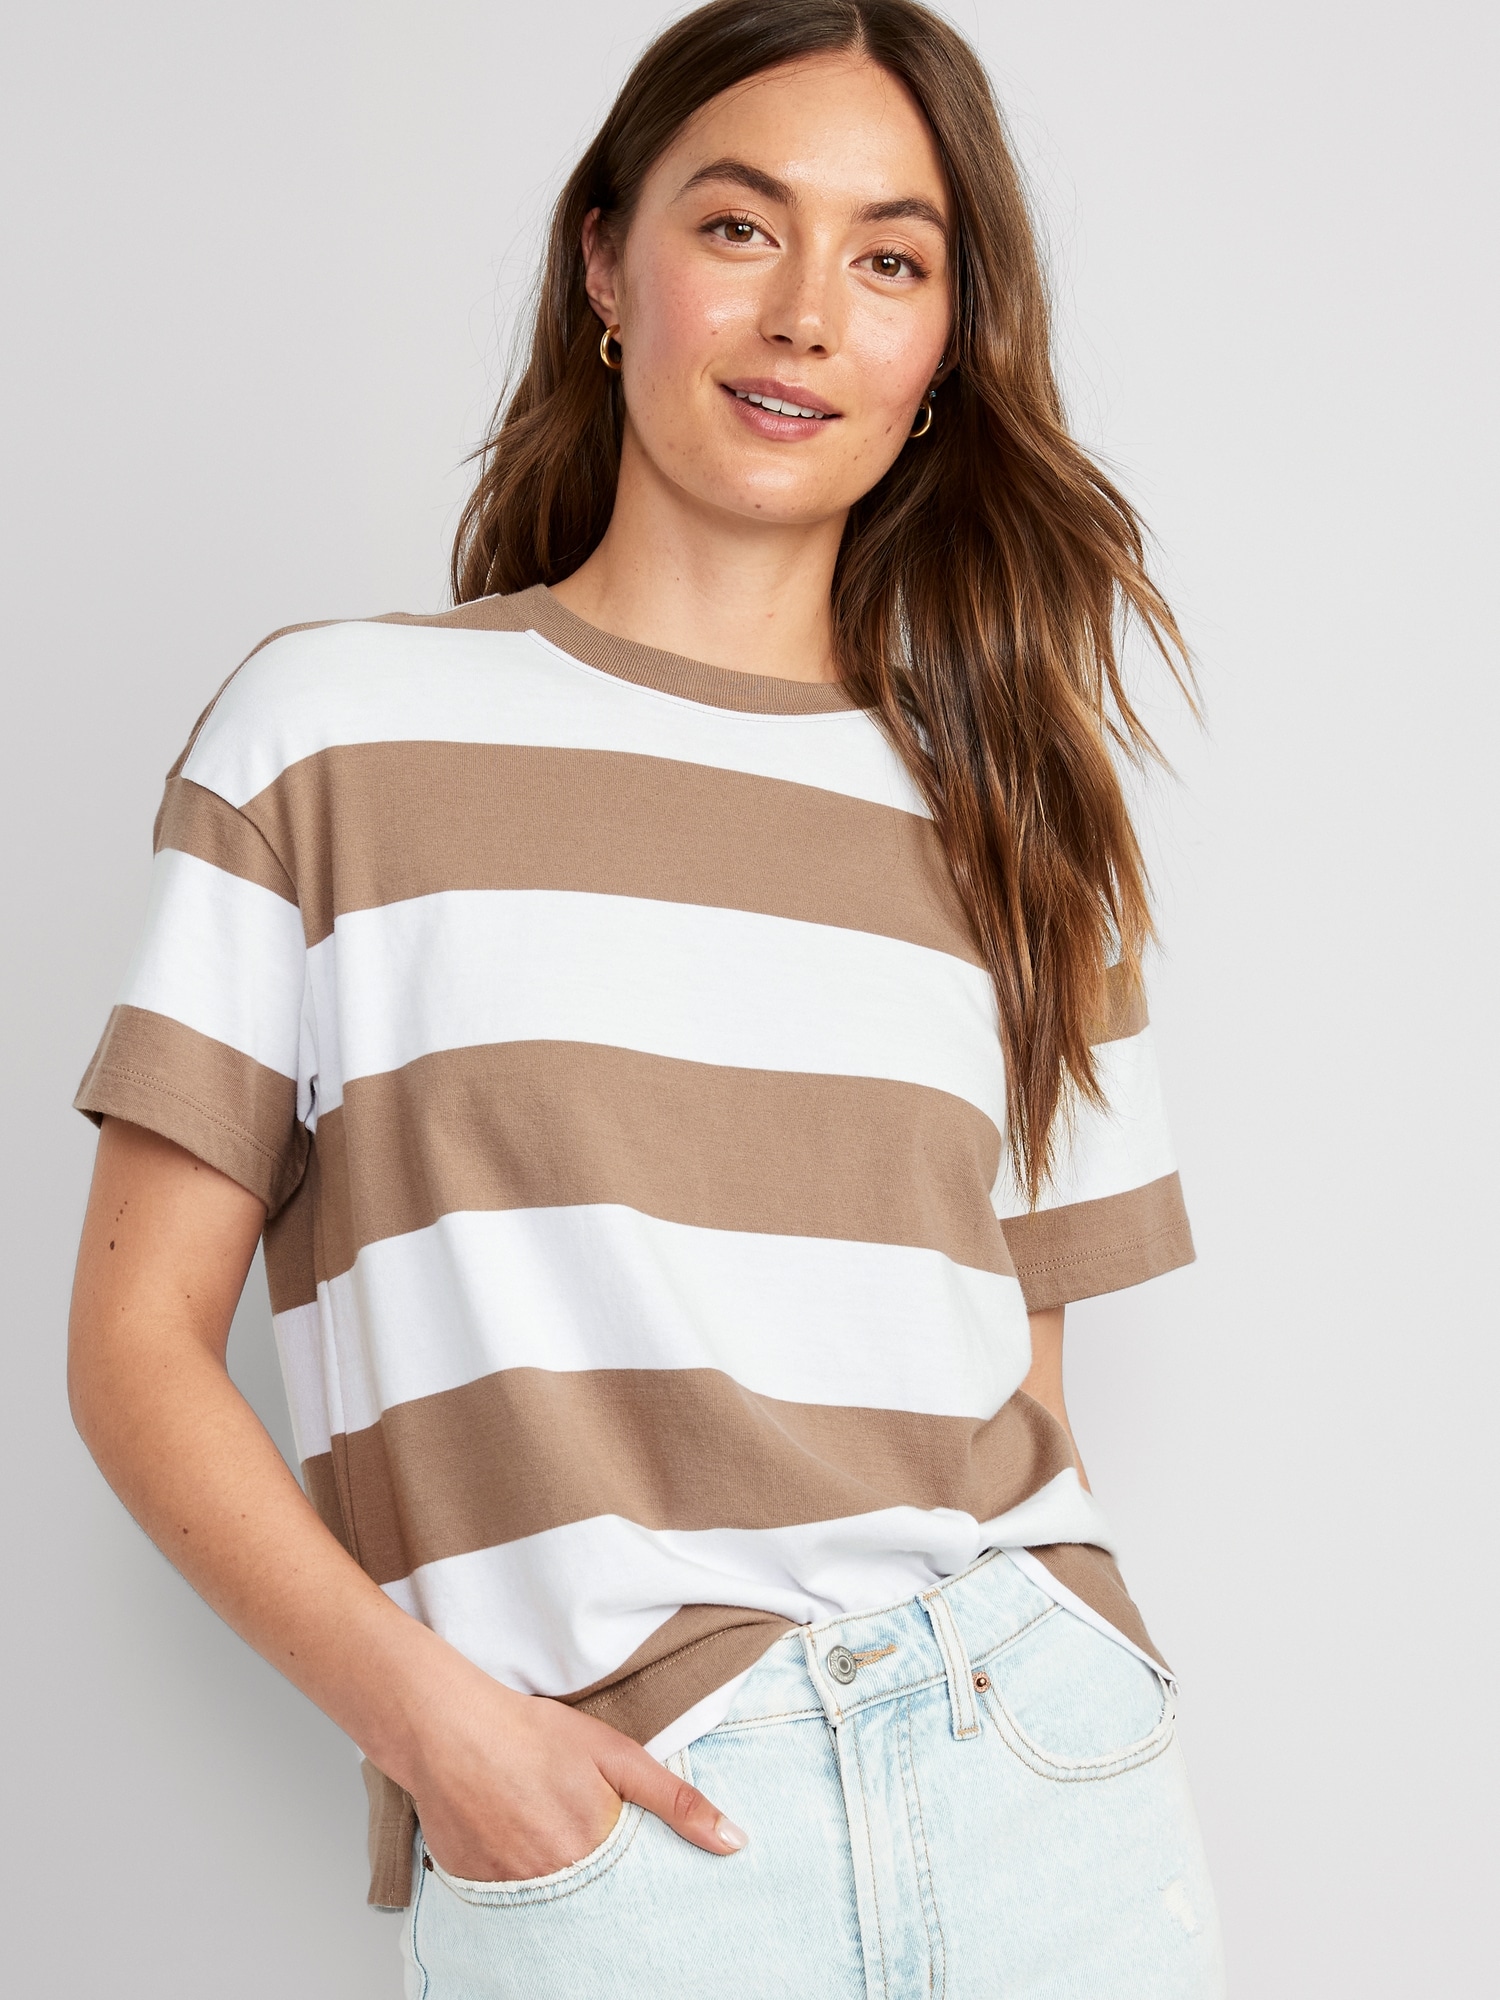 Old Navy Vintage Striped T-Shirt for Women brown. 1